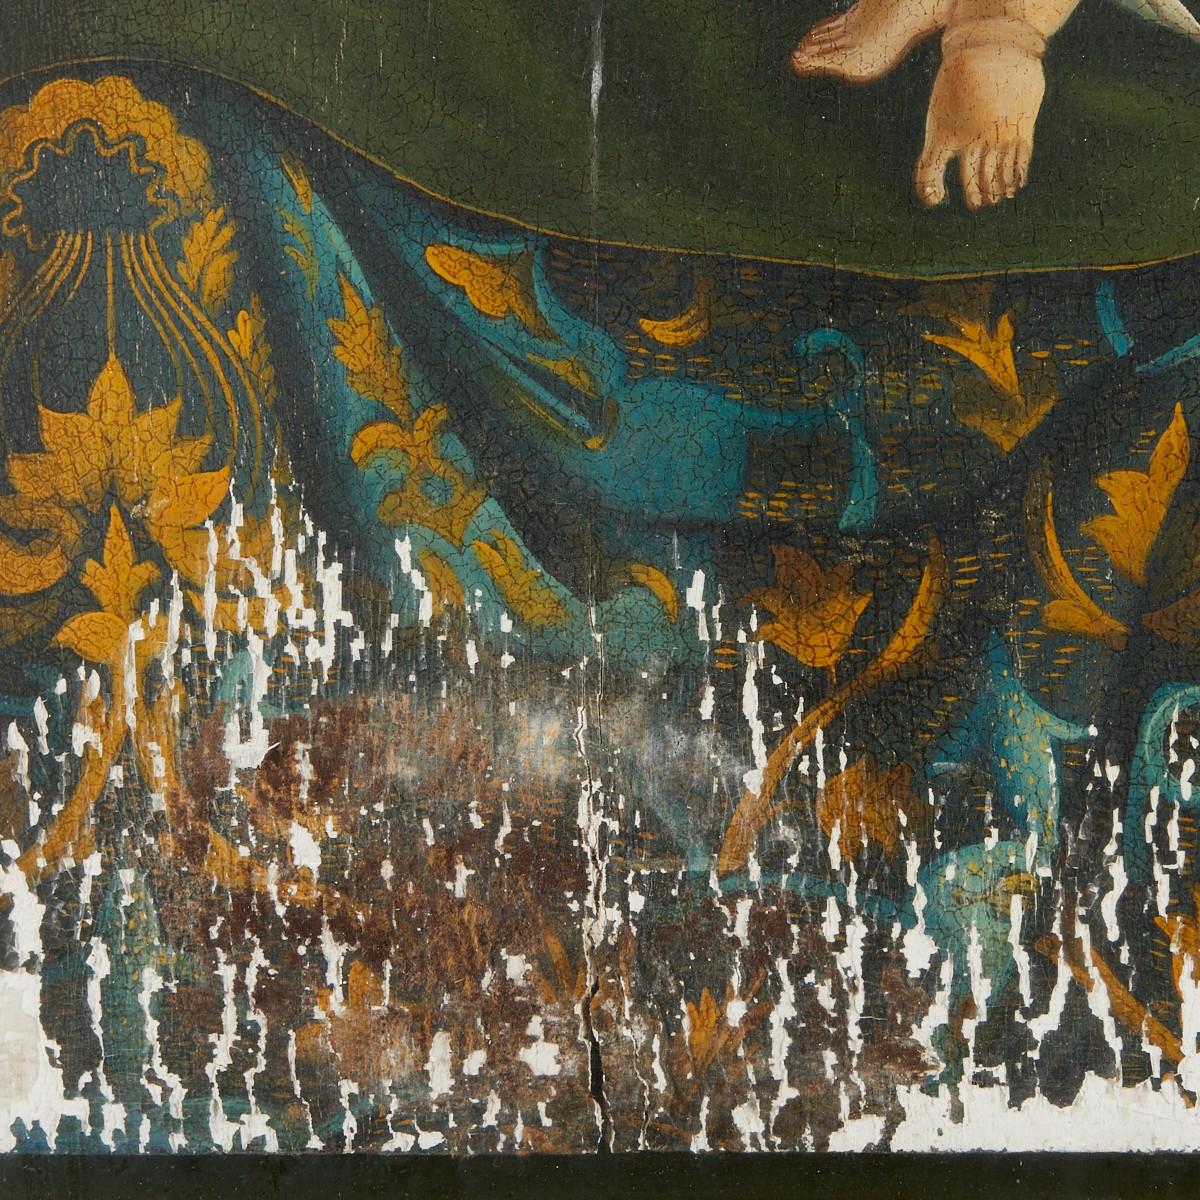 Madonna and Child Painting on Panel - Damaged - Image 6 of 8